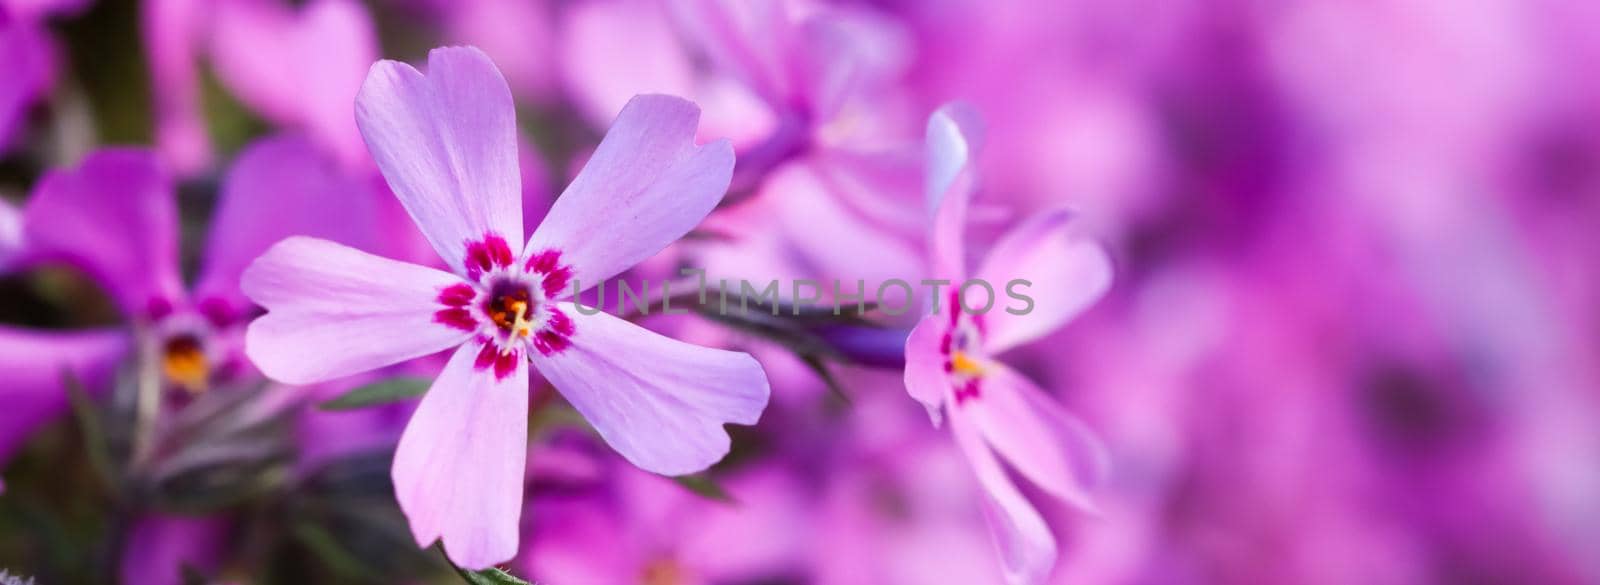 Pink flowers of Creeping Phlox in spring. Floral background by Olayola